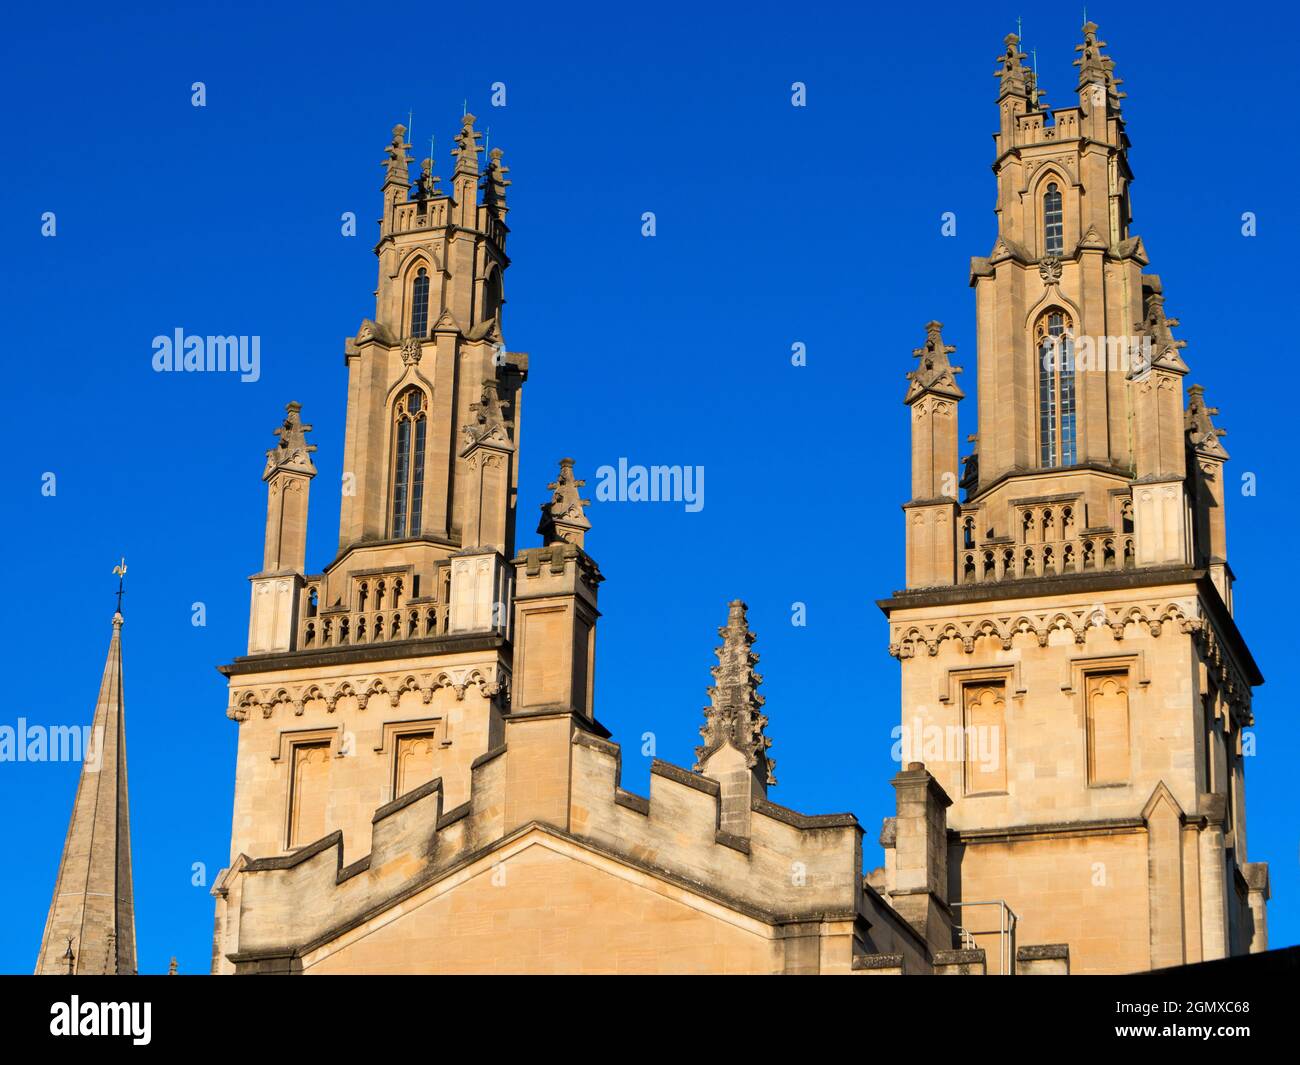 Oxford, England - 7 August 2020; no people in view. All Souls College was founded by Henry VI of England and the Archbishop of Canterbury, in 1438.  U Stock Photo